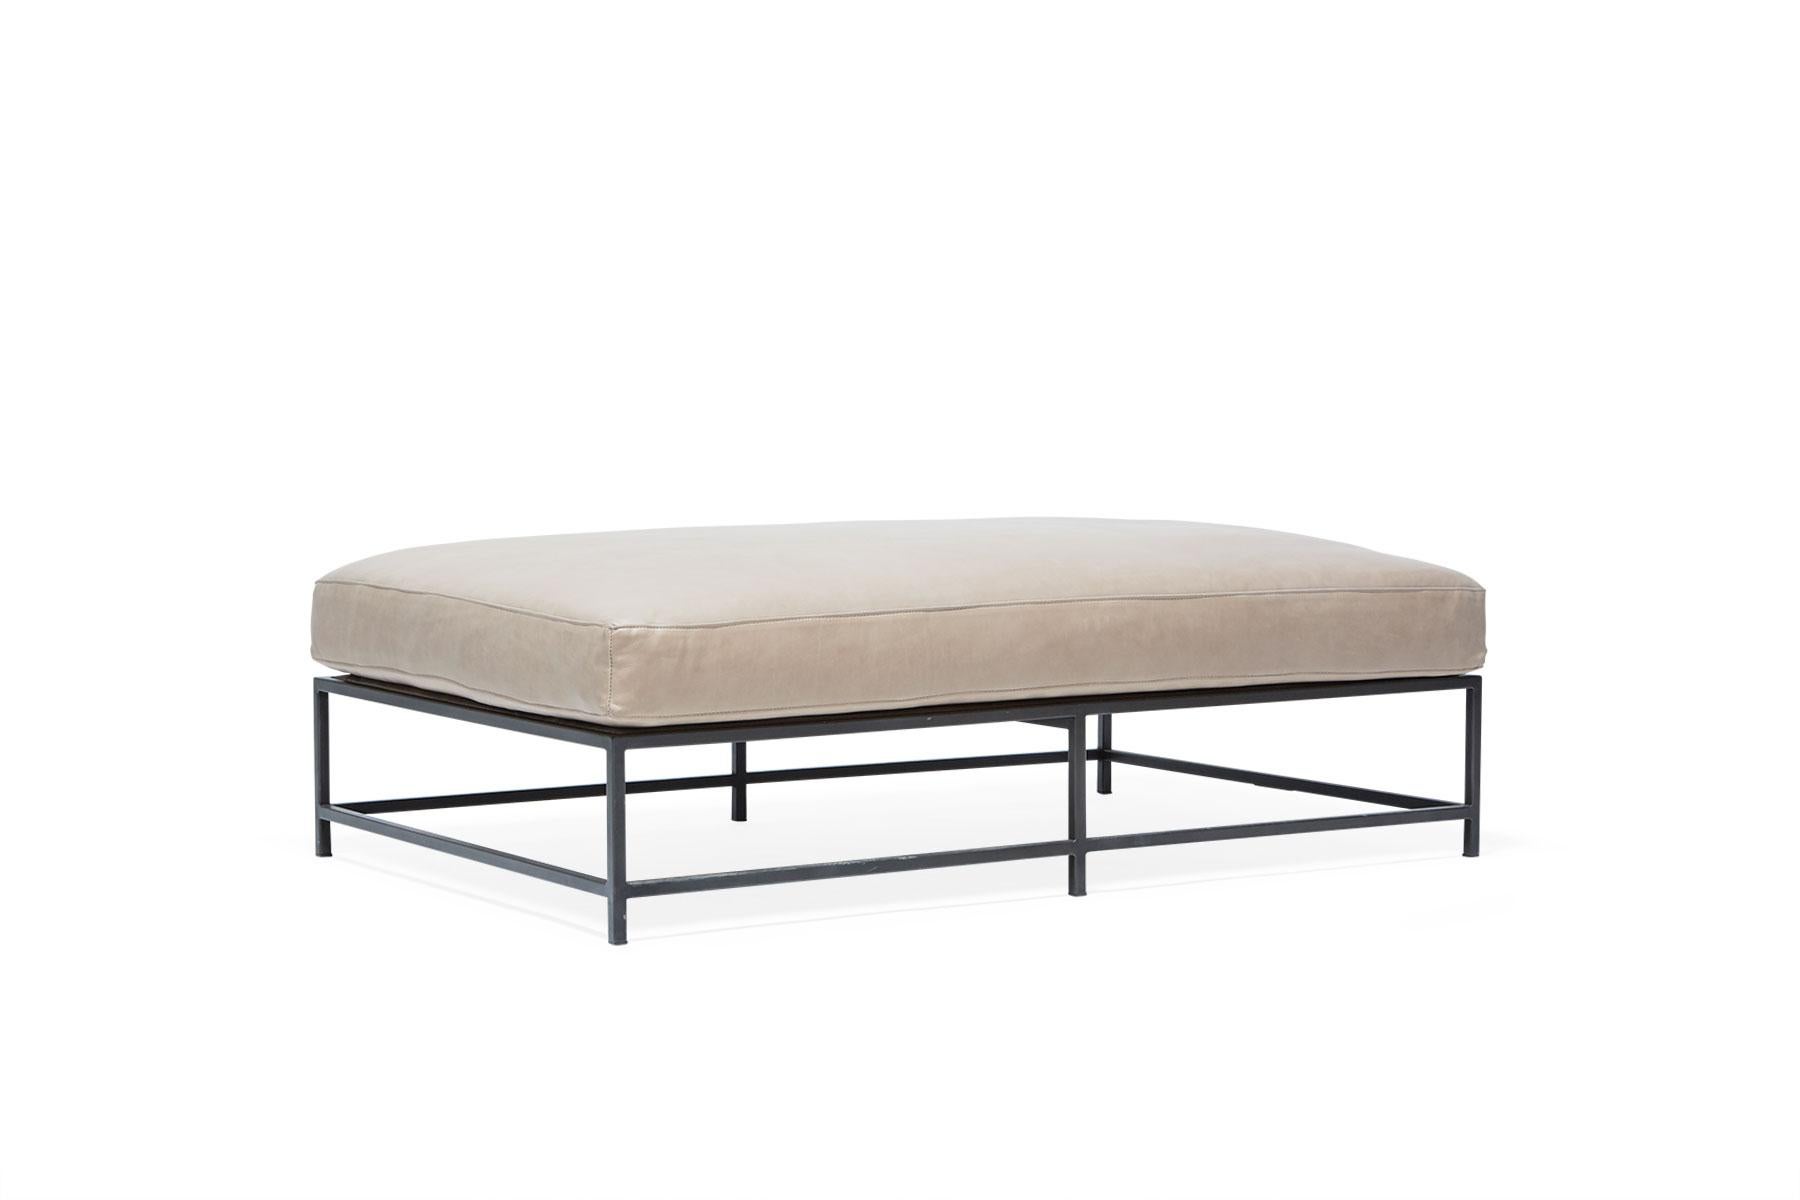 The Inheritance Bench is a versatile piece that can be used as a chaise extension on any sofa, as an independent seating option or as a large upholstered coffee table. 

This variation is upholstered in a smooth smoke leather. The foam seat cushions